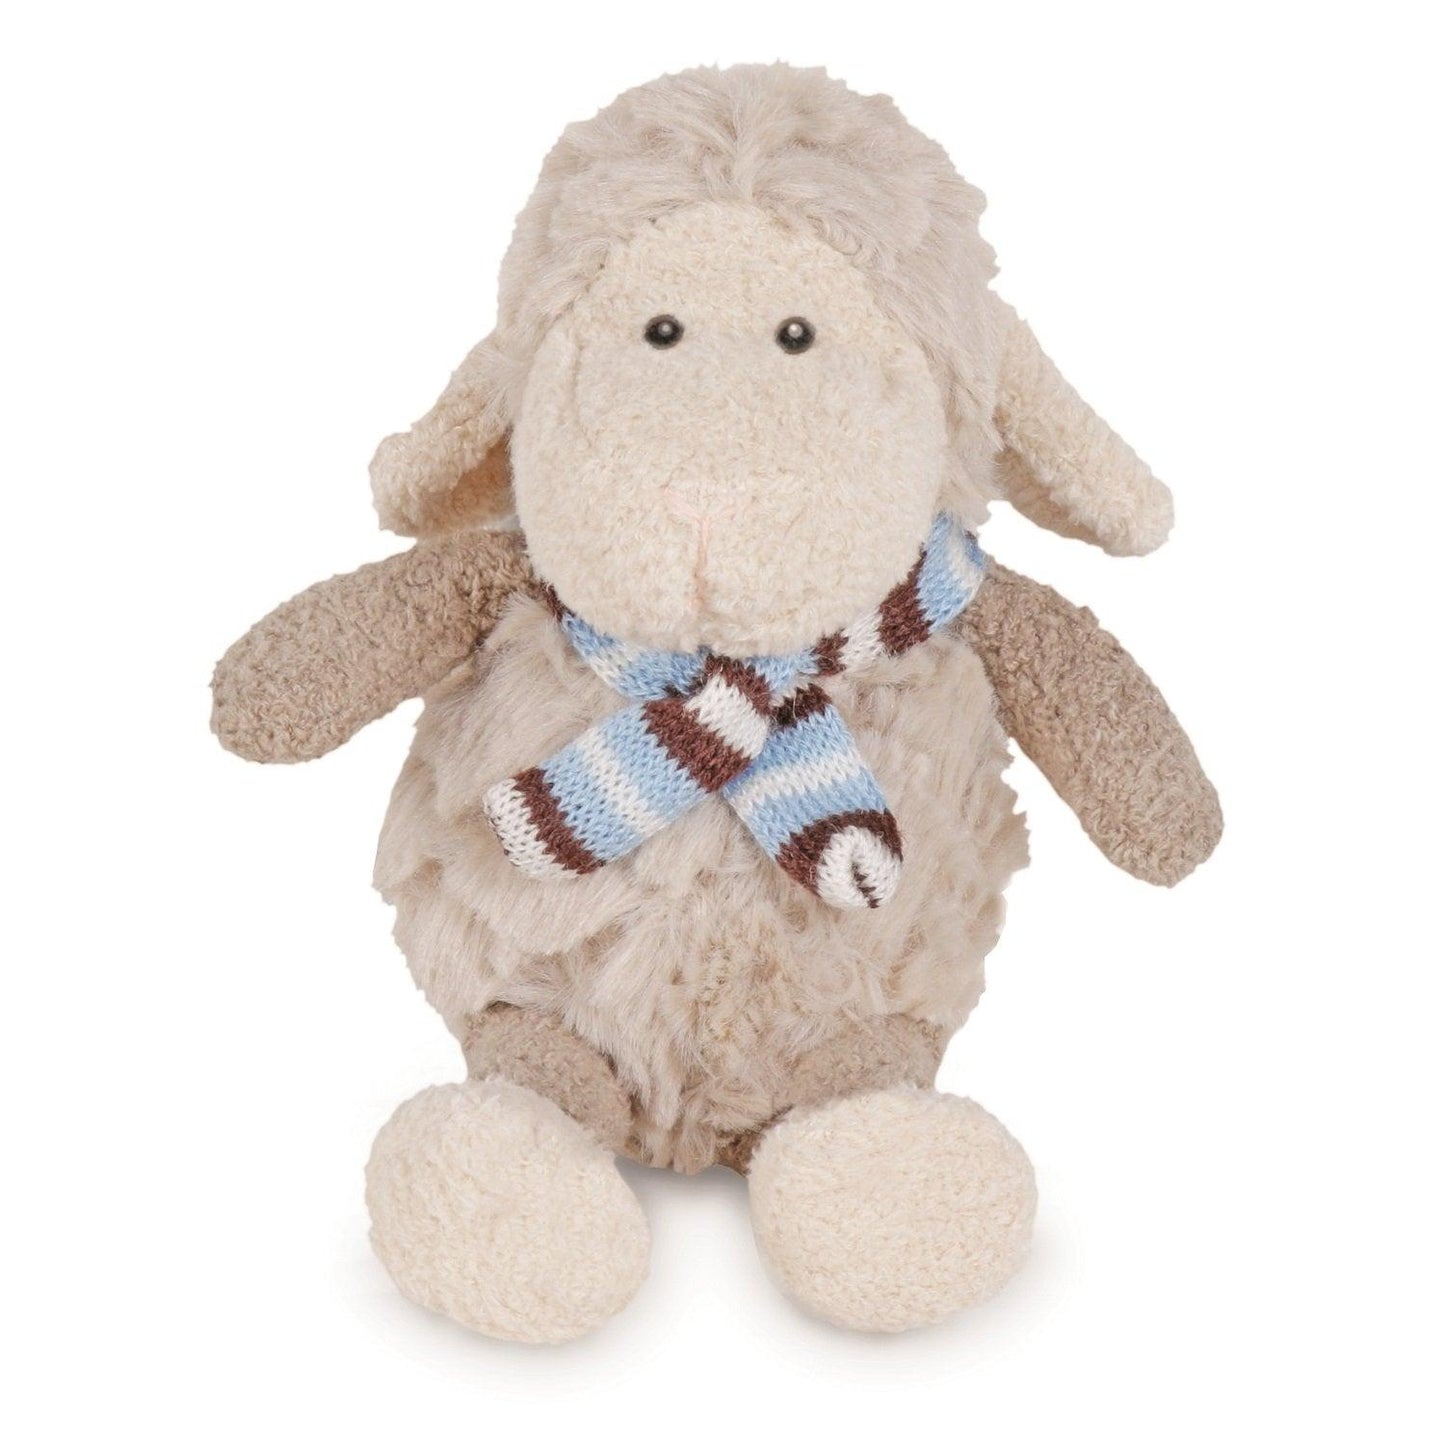 Knit Scarf Sheep Soft Toy - Blue Gifts - Soft Toy